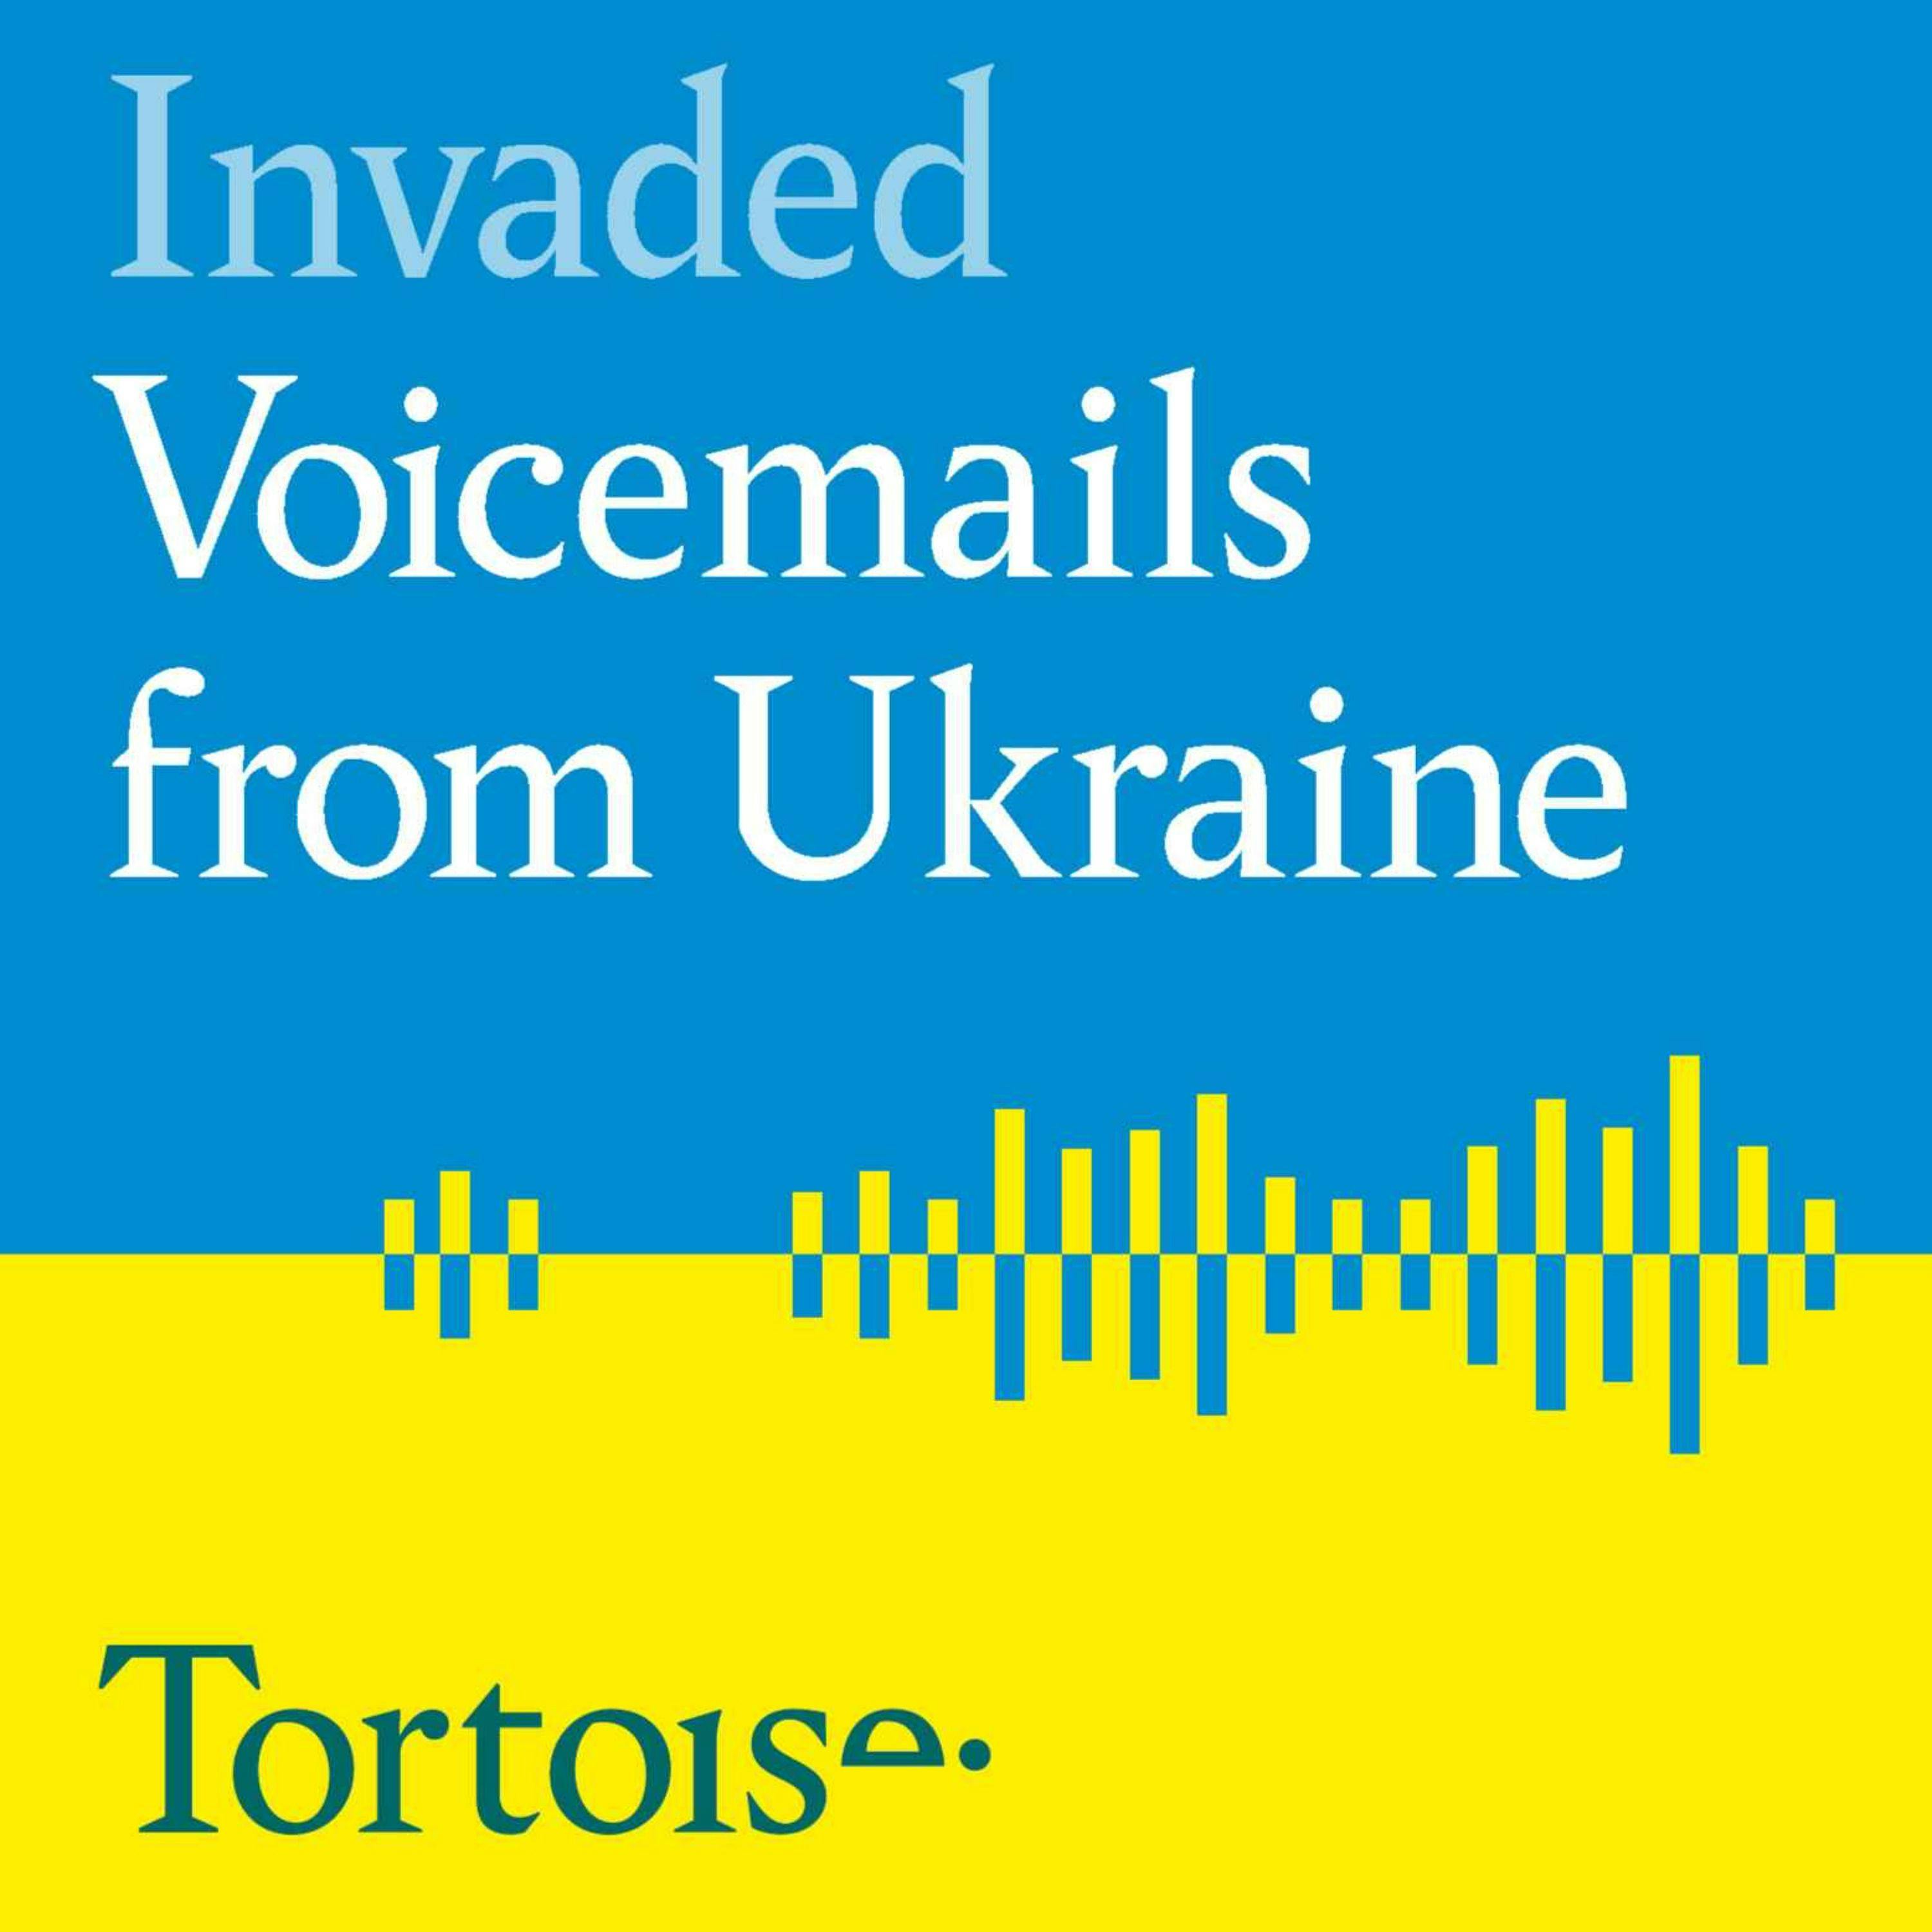 Invaded: Voicemails from Ukraine